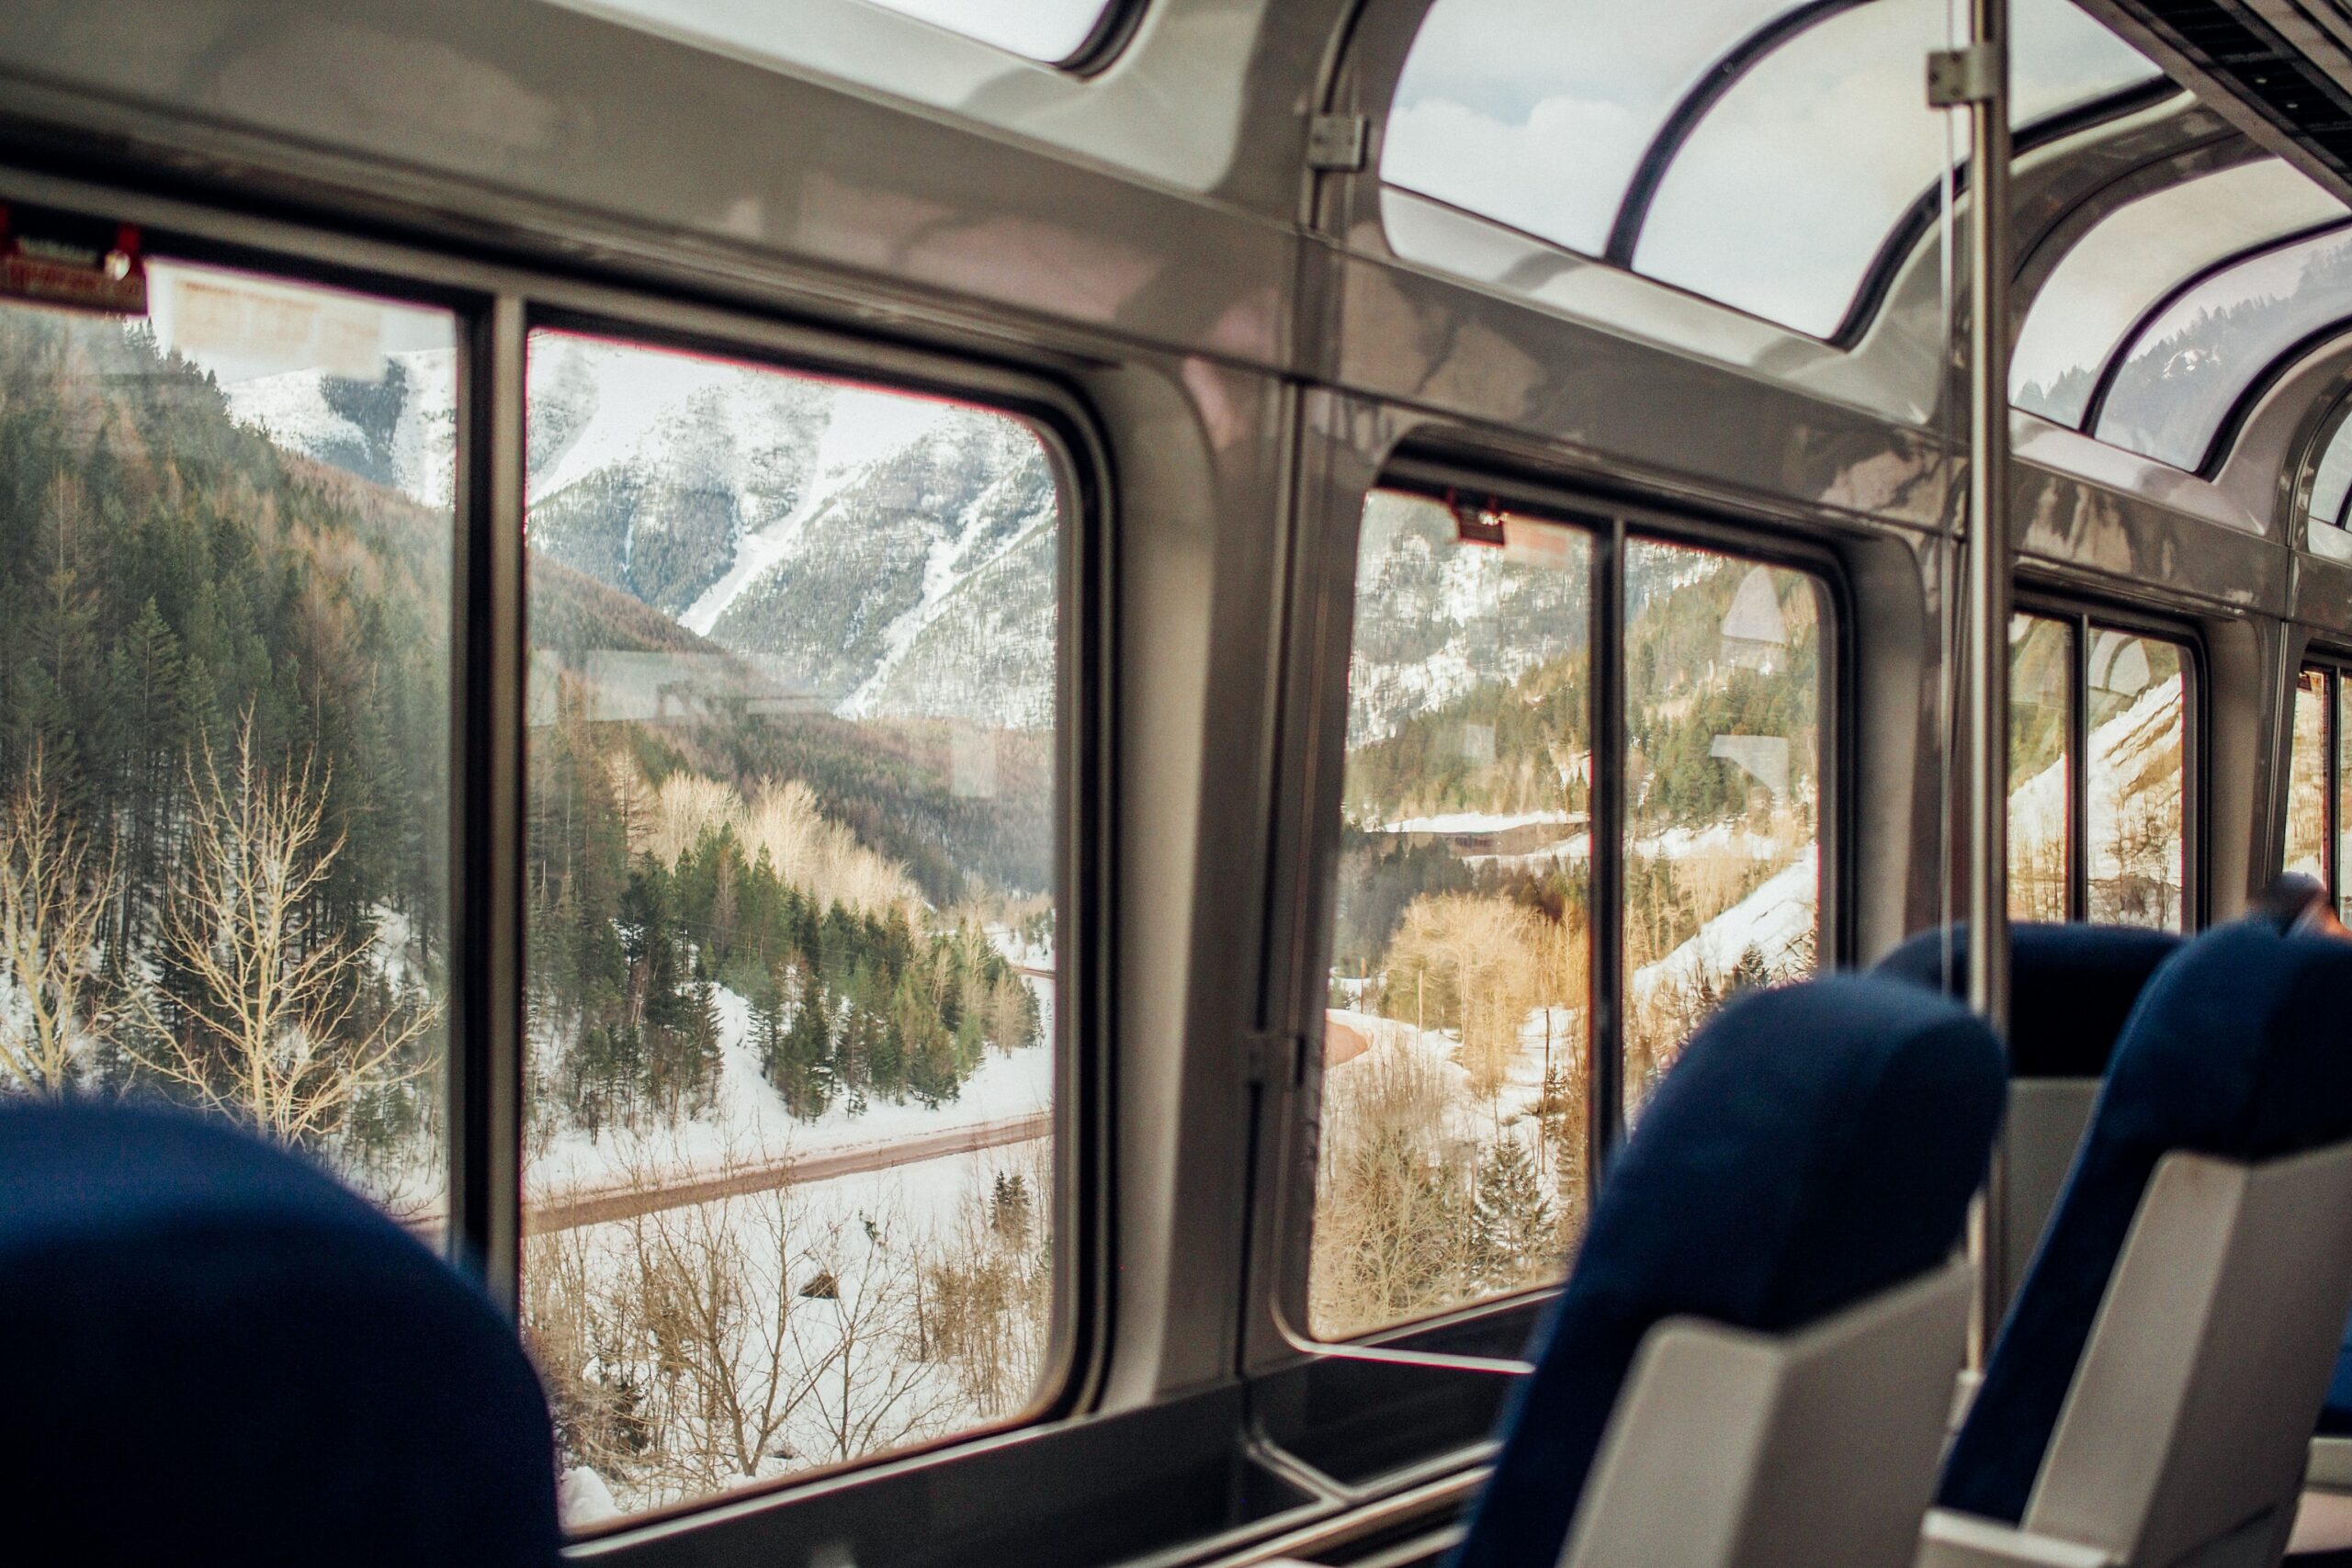 10 Ways To Get Cheap Amtrak Train Tickets on the Empire Builder from Chicago to Portland!